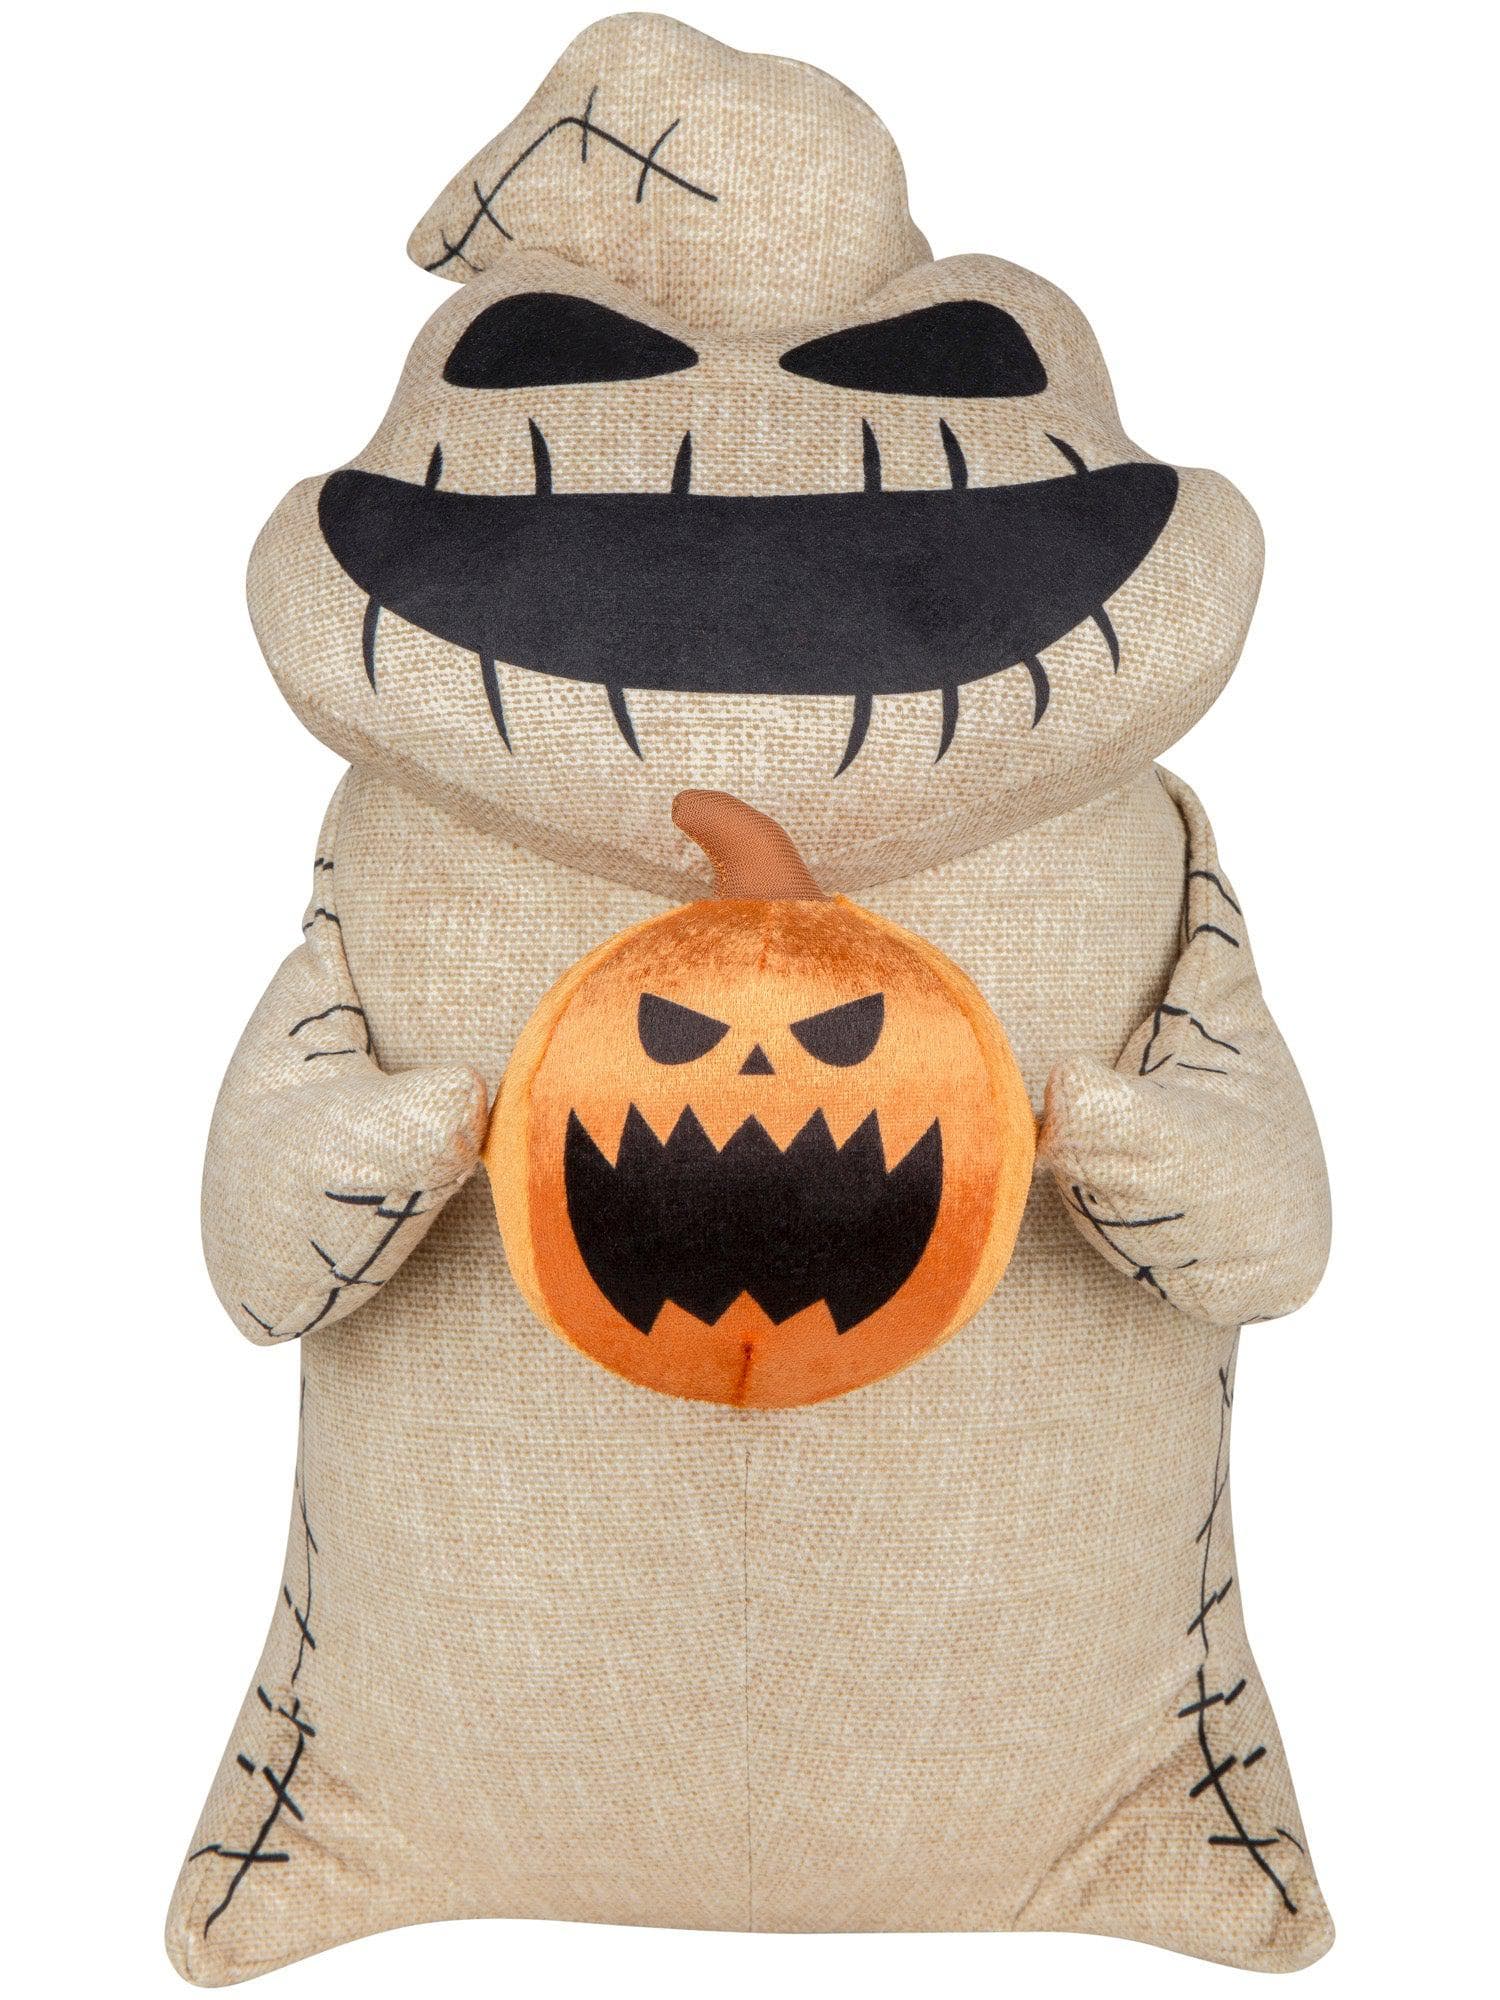 18 Inch The Nightmare Before Christmas Oogie Boogie Holding Pumpkin Plush Front Door Greeter - costumes.com